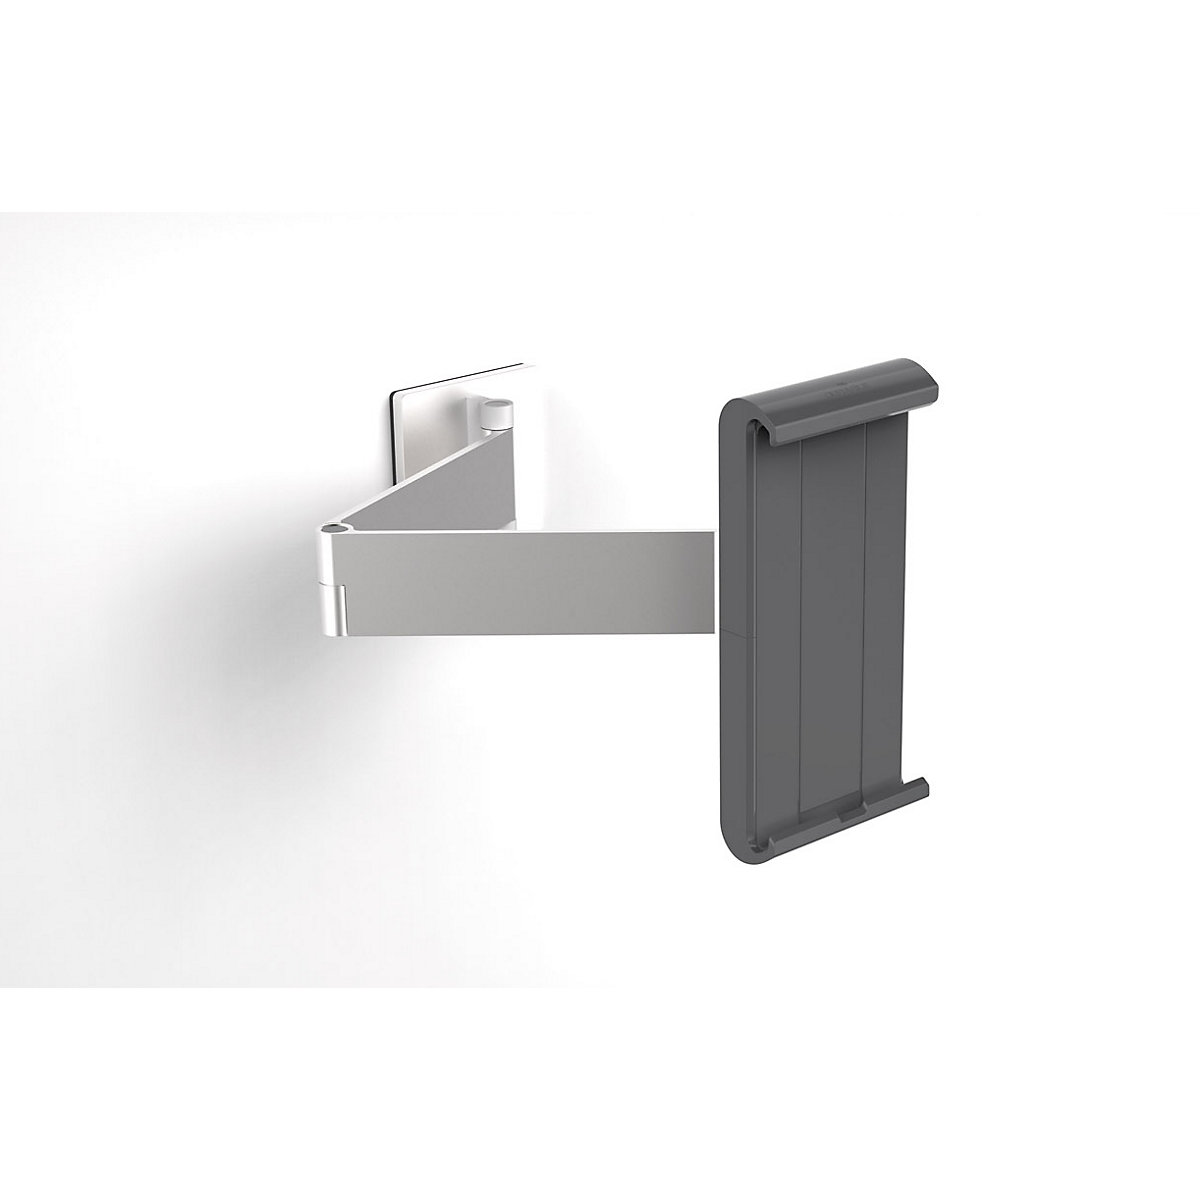 Tablethalter DURABLE: HOLDER WALL ARM